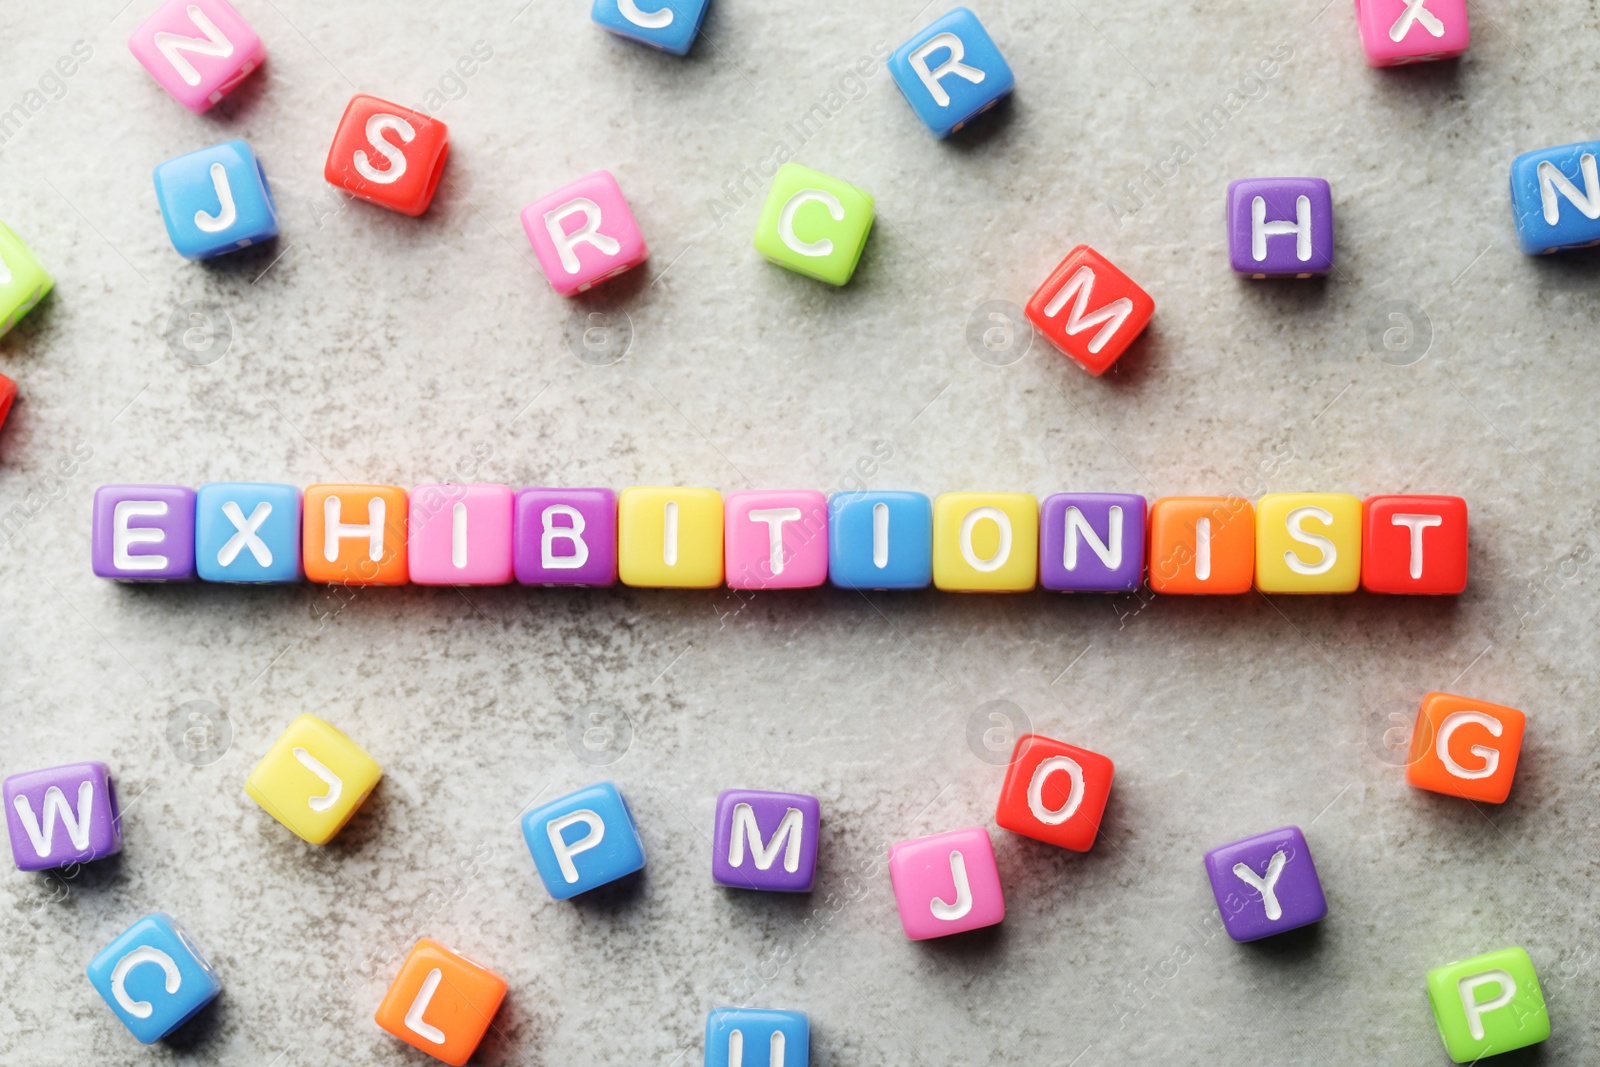 Photo of Word EXHIBITIONIST made with colorful cubes on light grey table, flat lay